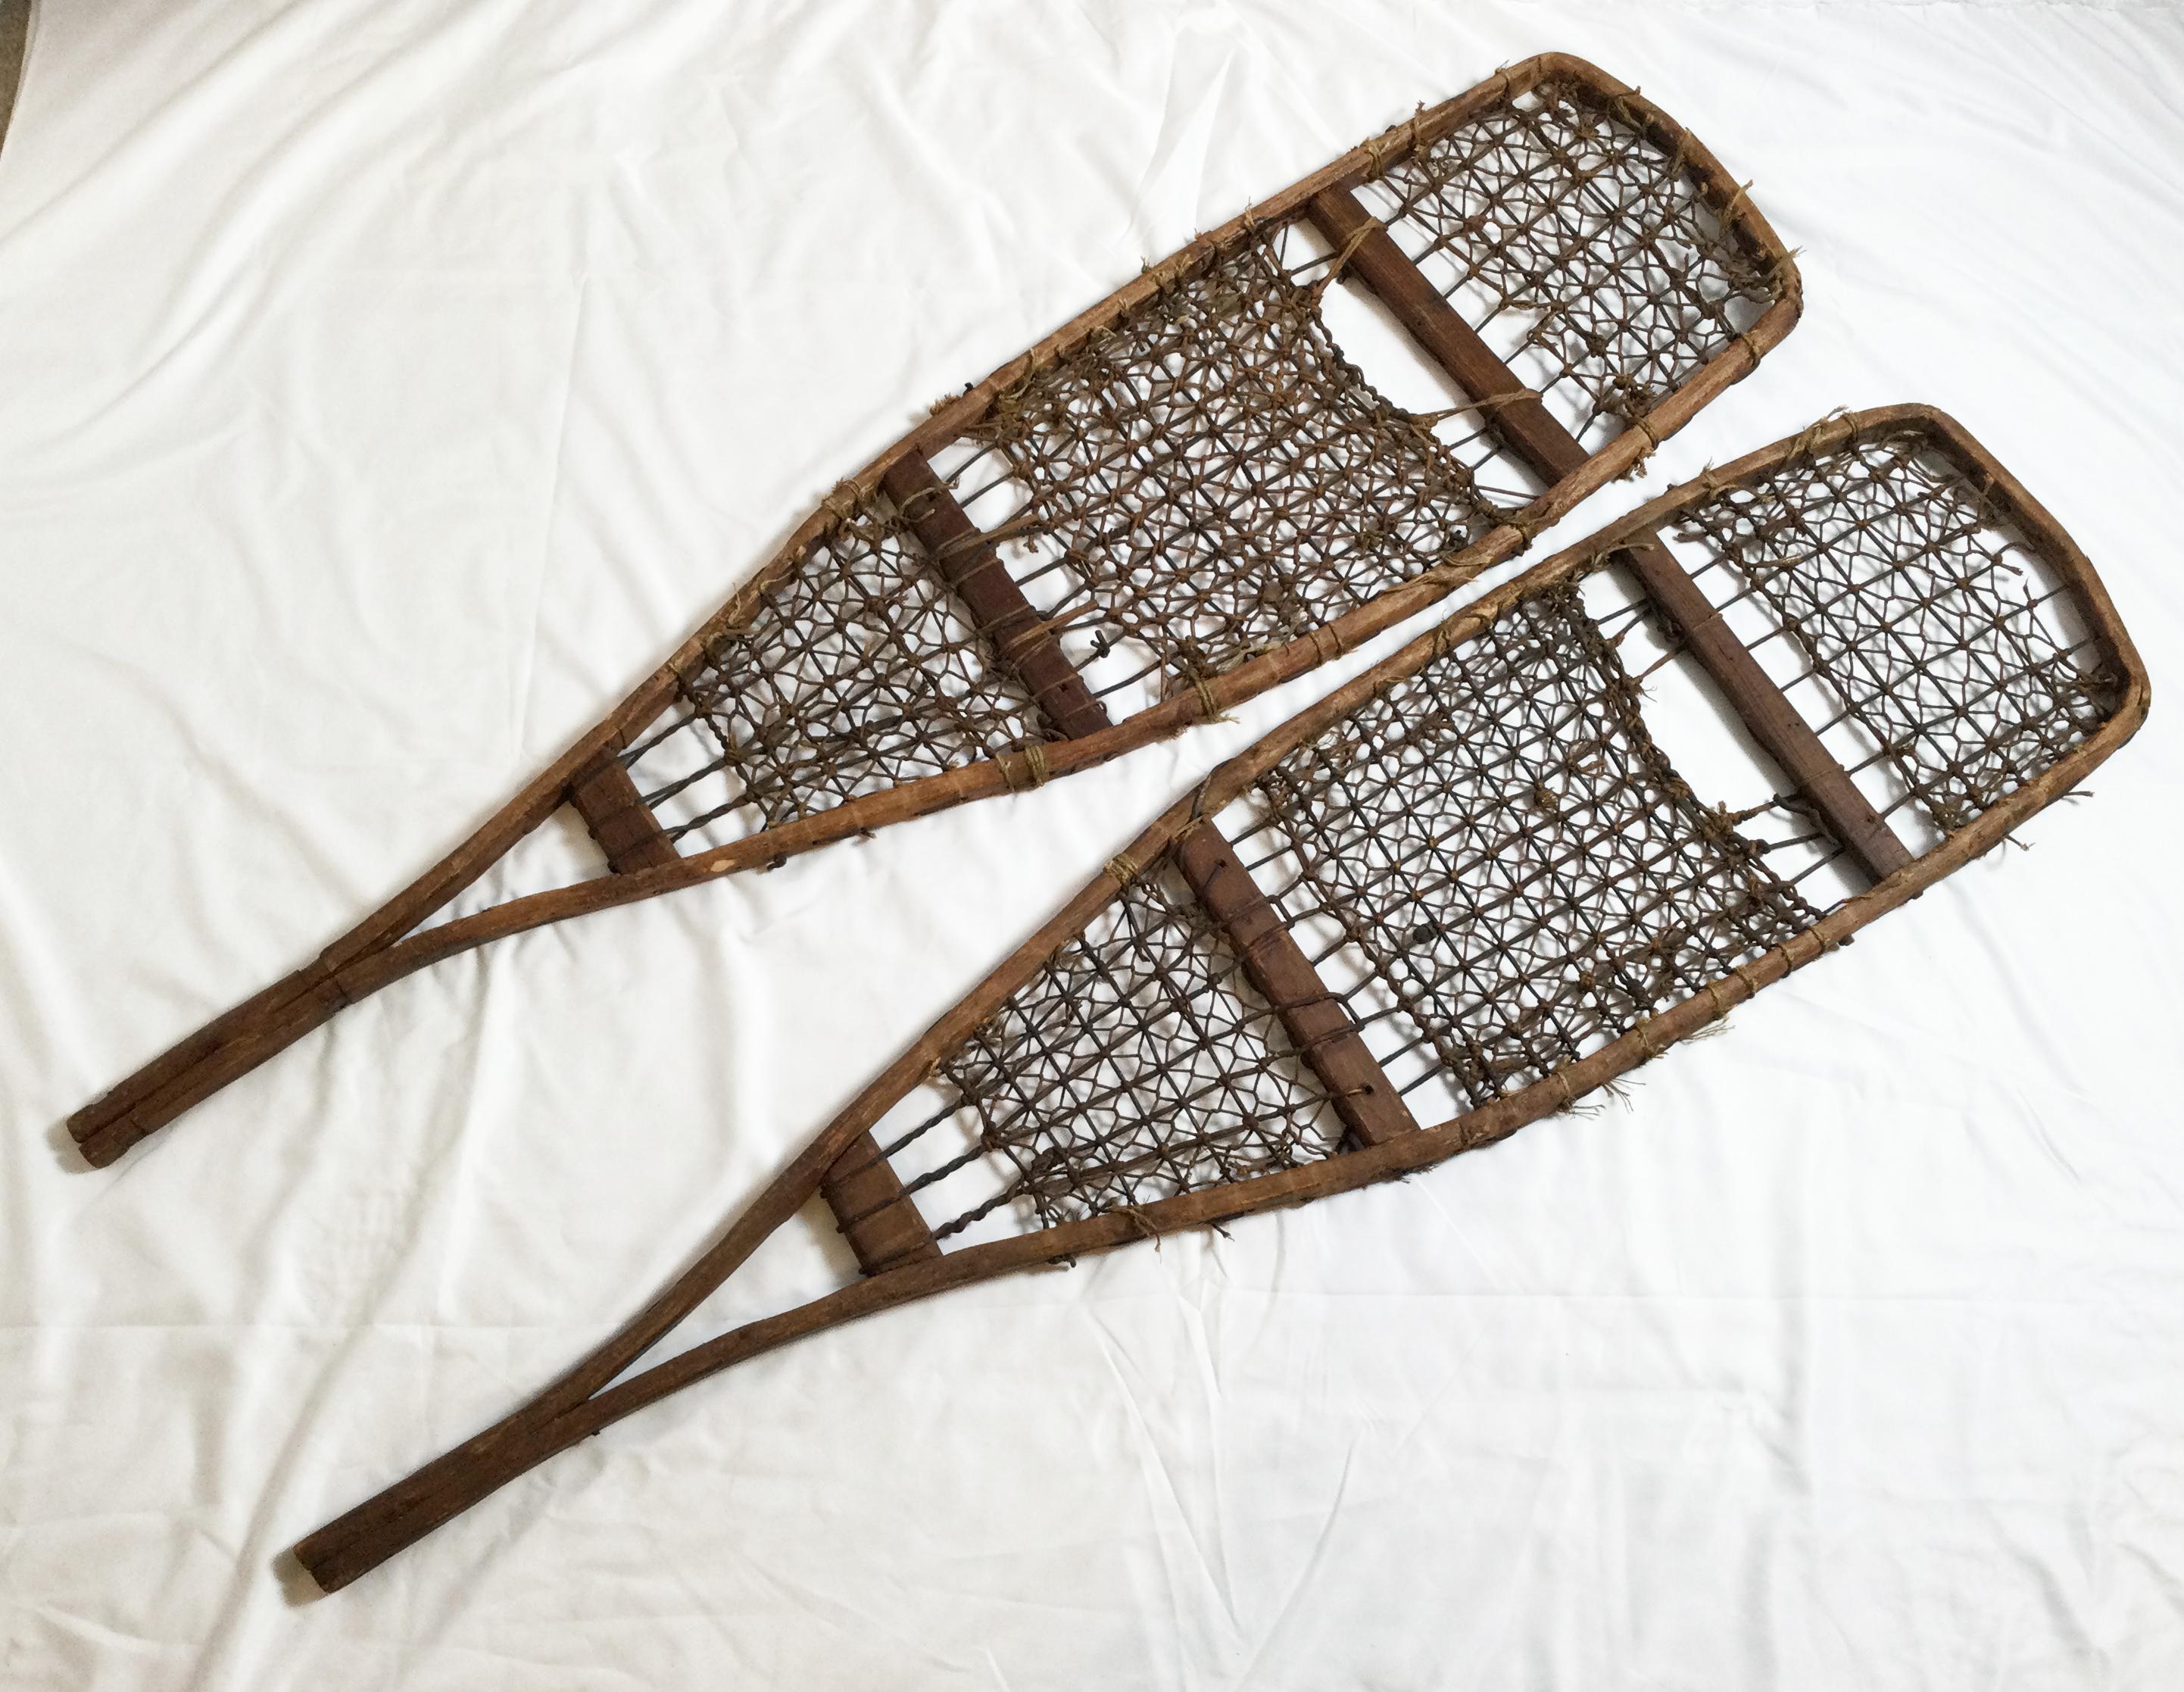 These well-worn truly Classic snowshoes have wonderful character! The handcrafted pair shows off an intricate weave, the wood frame measures 10” at the bottom and 12” at its widest point. Although these are now “retired” their original purpose and